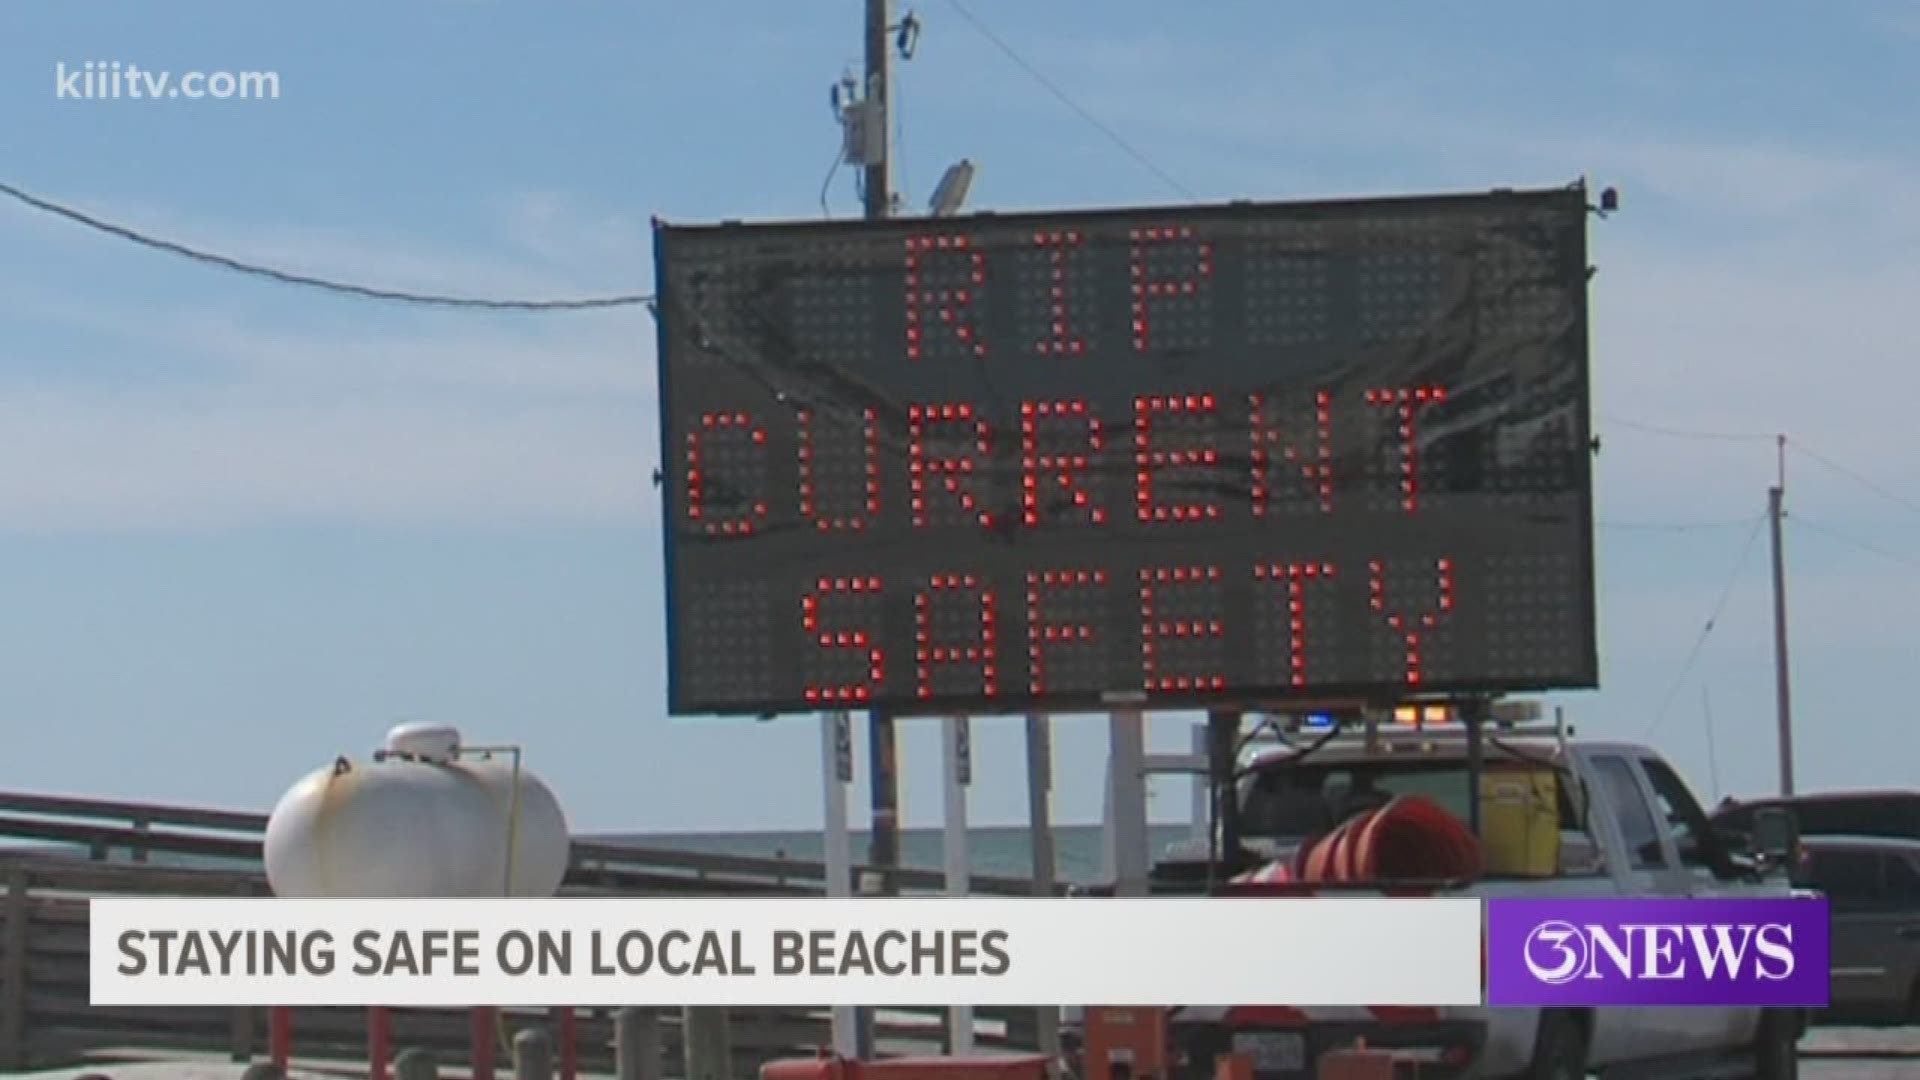 The signs will be put on the J.F.K. Causeway, the ferry in Port Aransas, and county beaches so people can be warned of dangerous conditions in the ocean.